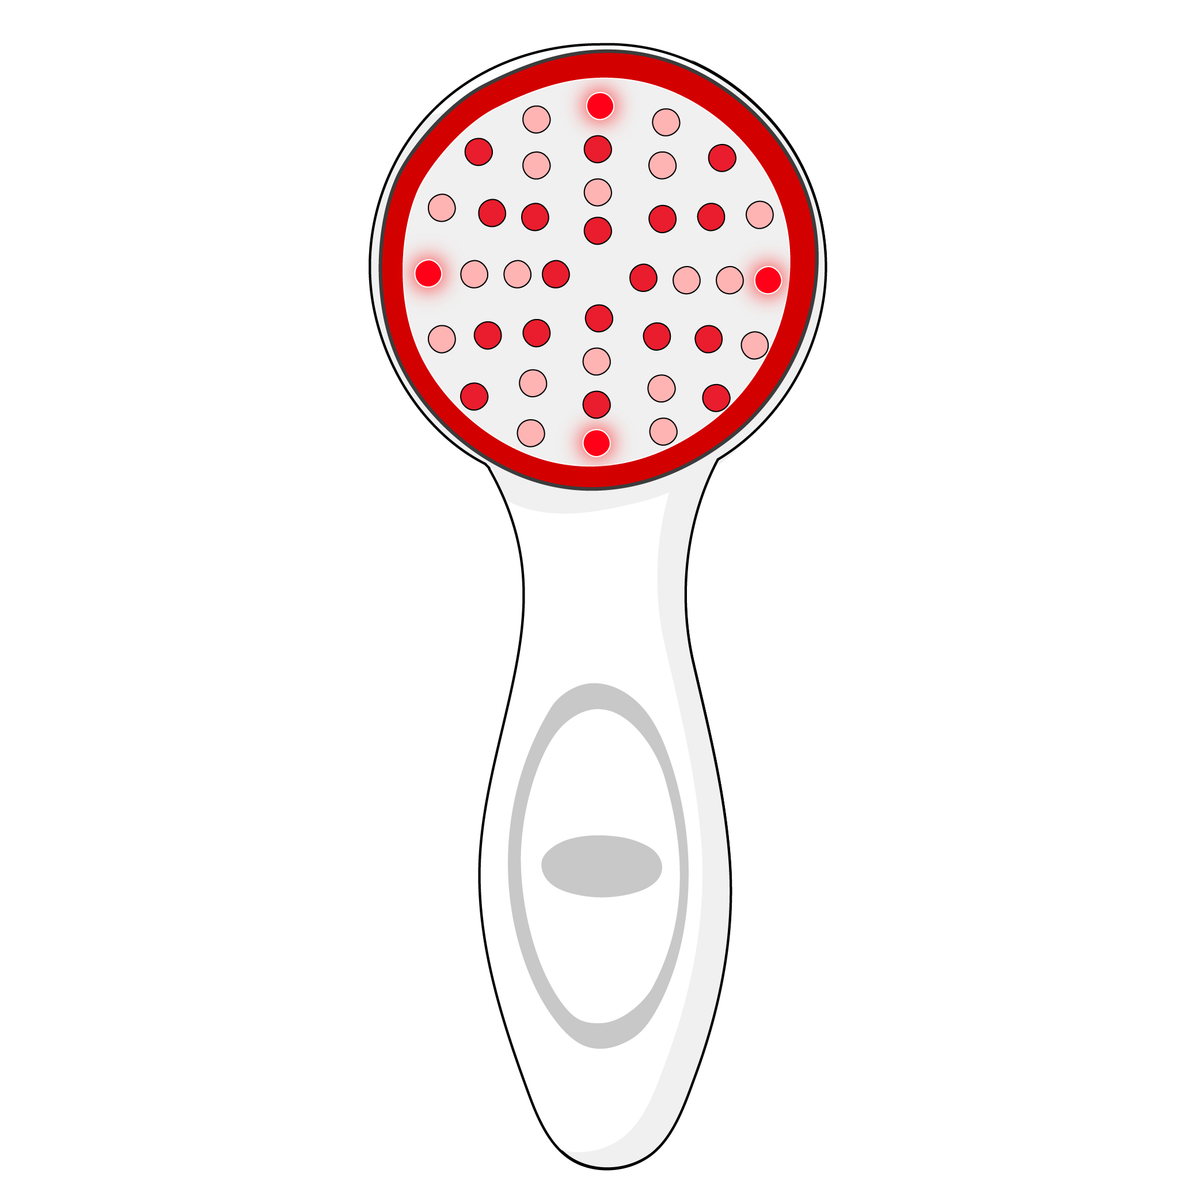 A graphic of a red light therapy device